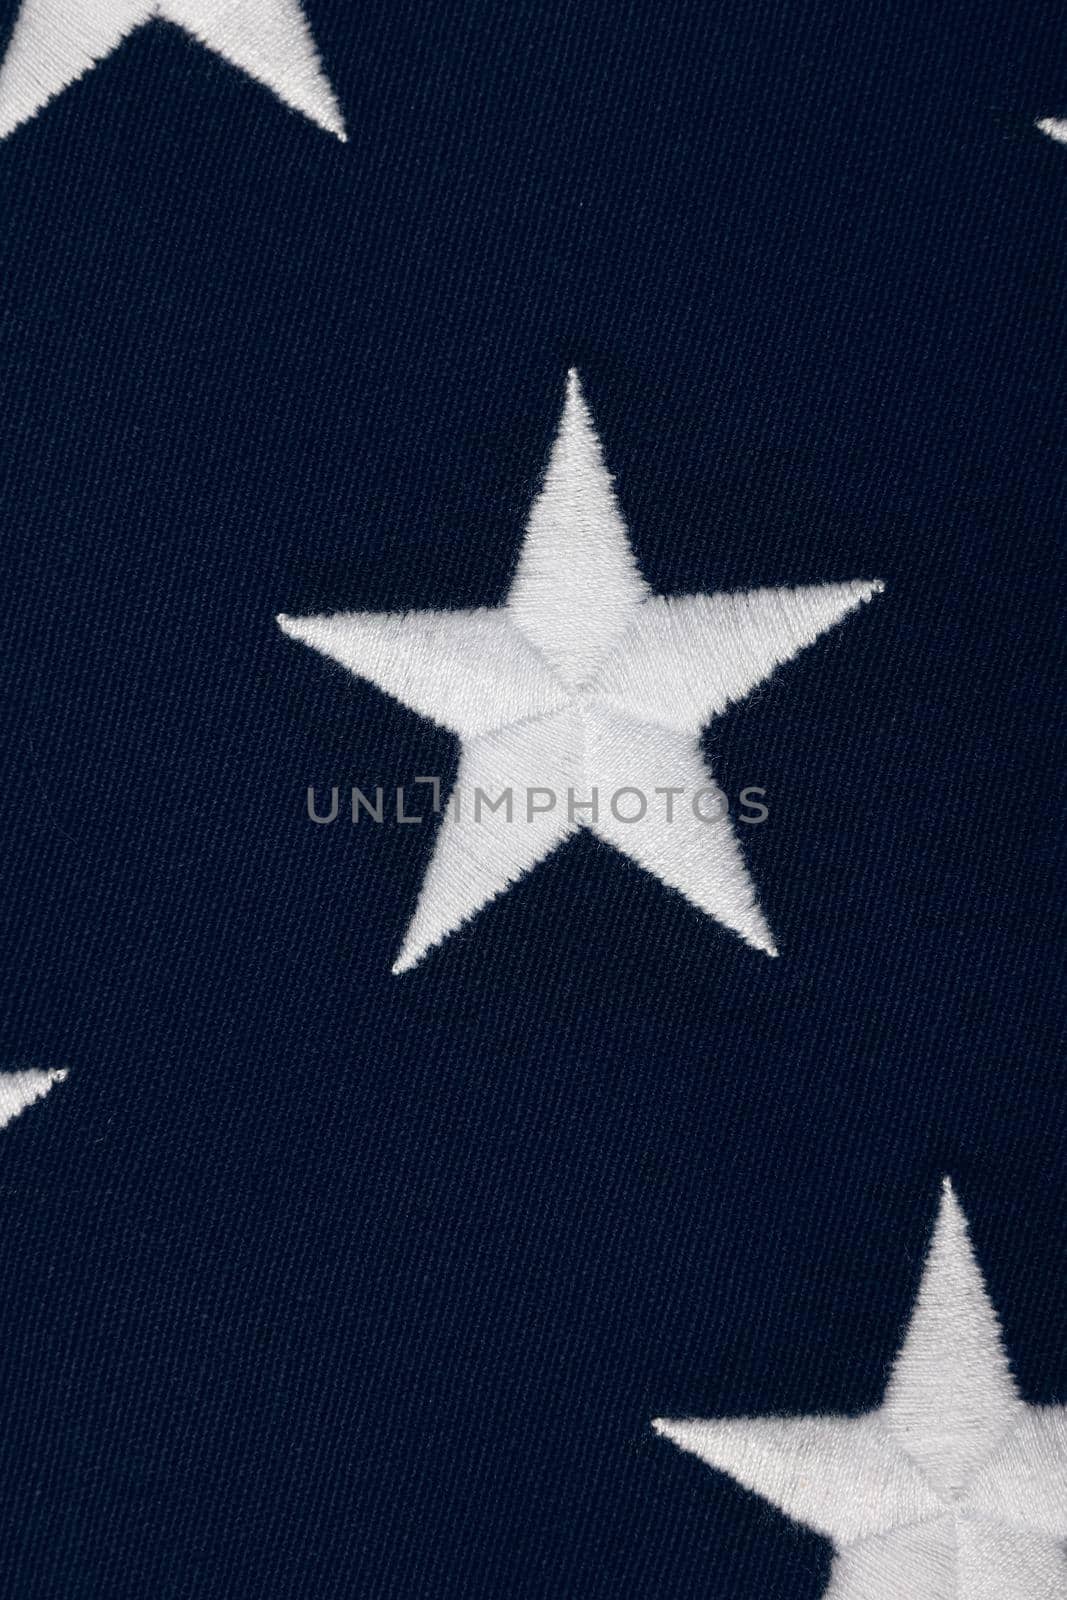 Close up embroidered white stars on blue canton of heavy cotton canvas US national flag, symbol of American patriotism, elevated high angle view, directly above